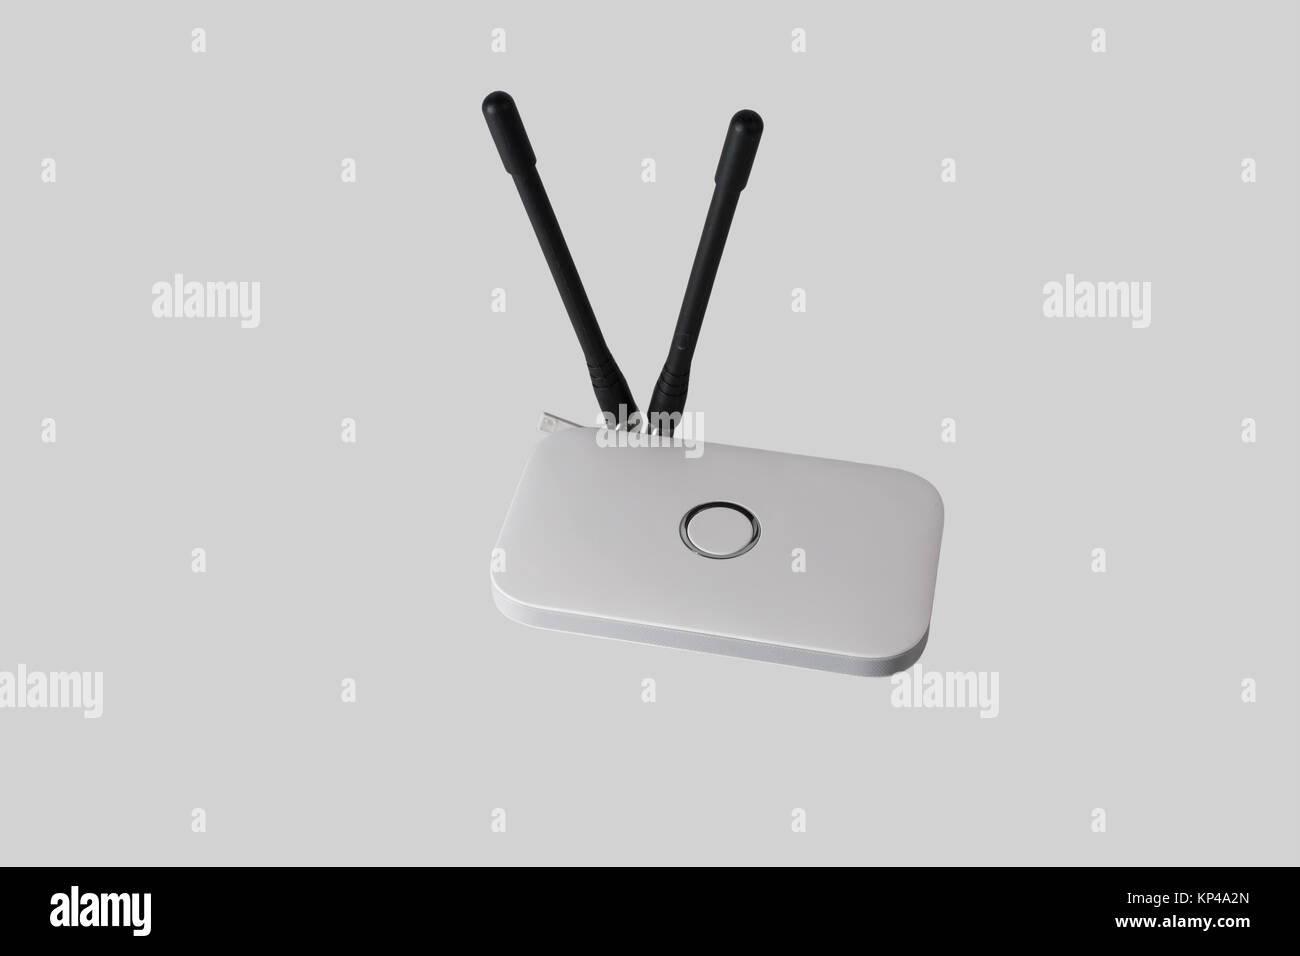 Wi-Fi portable router with connected external antennas Stock Photo - Alamy